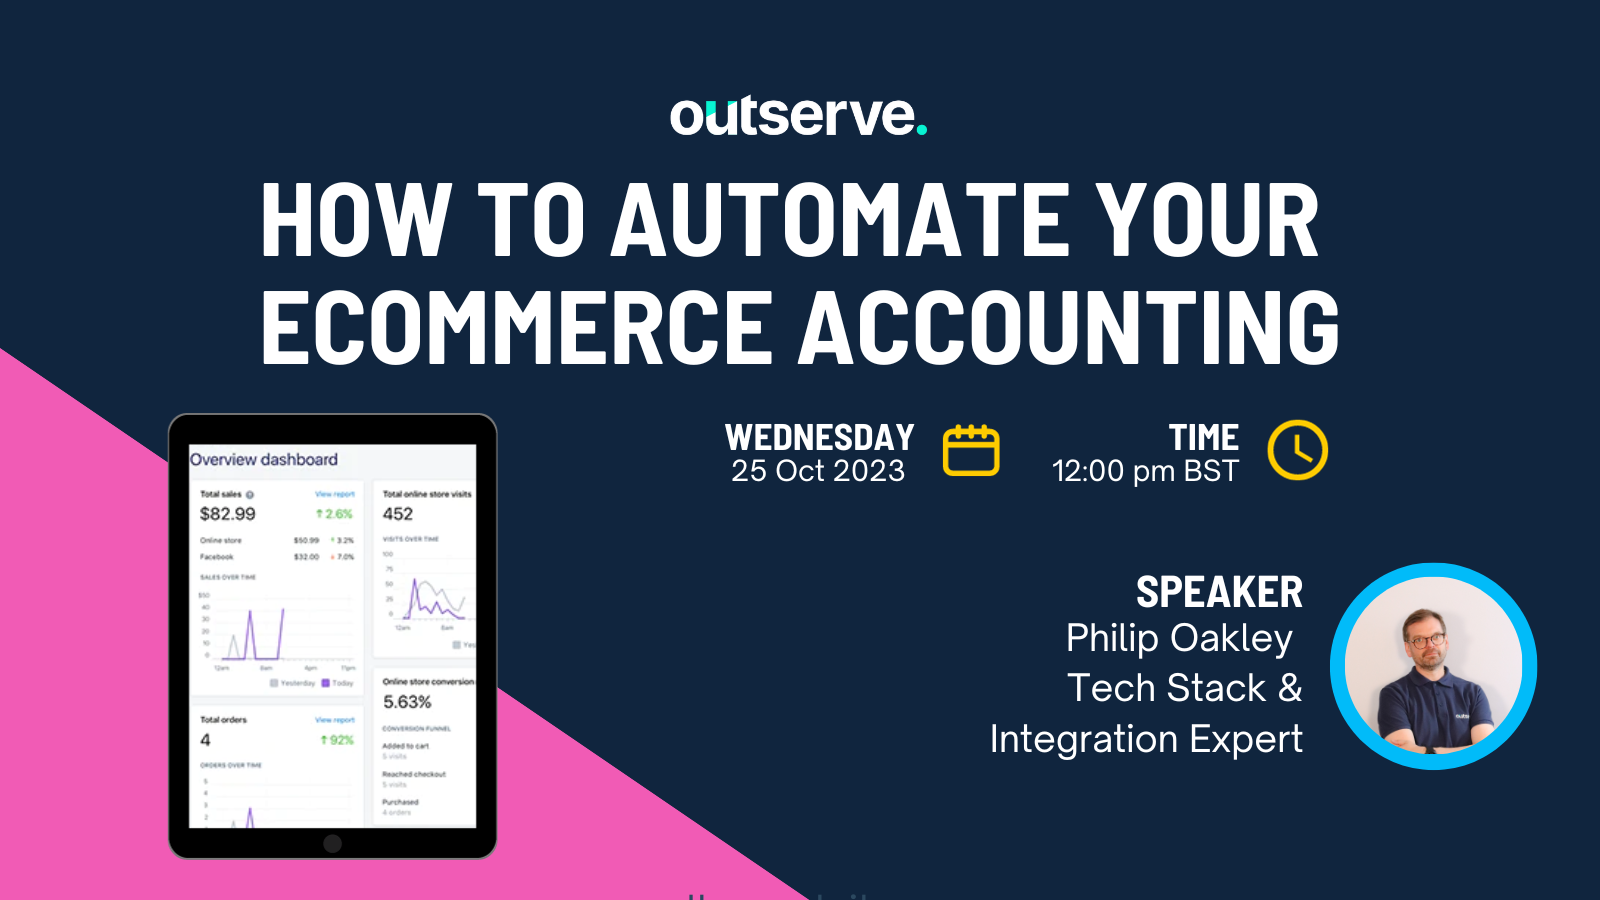 Webinar: how to automate your ecommerce accounting 25 October 2023